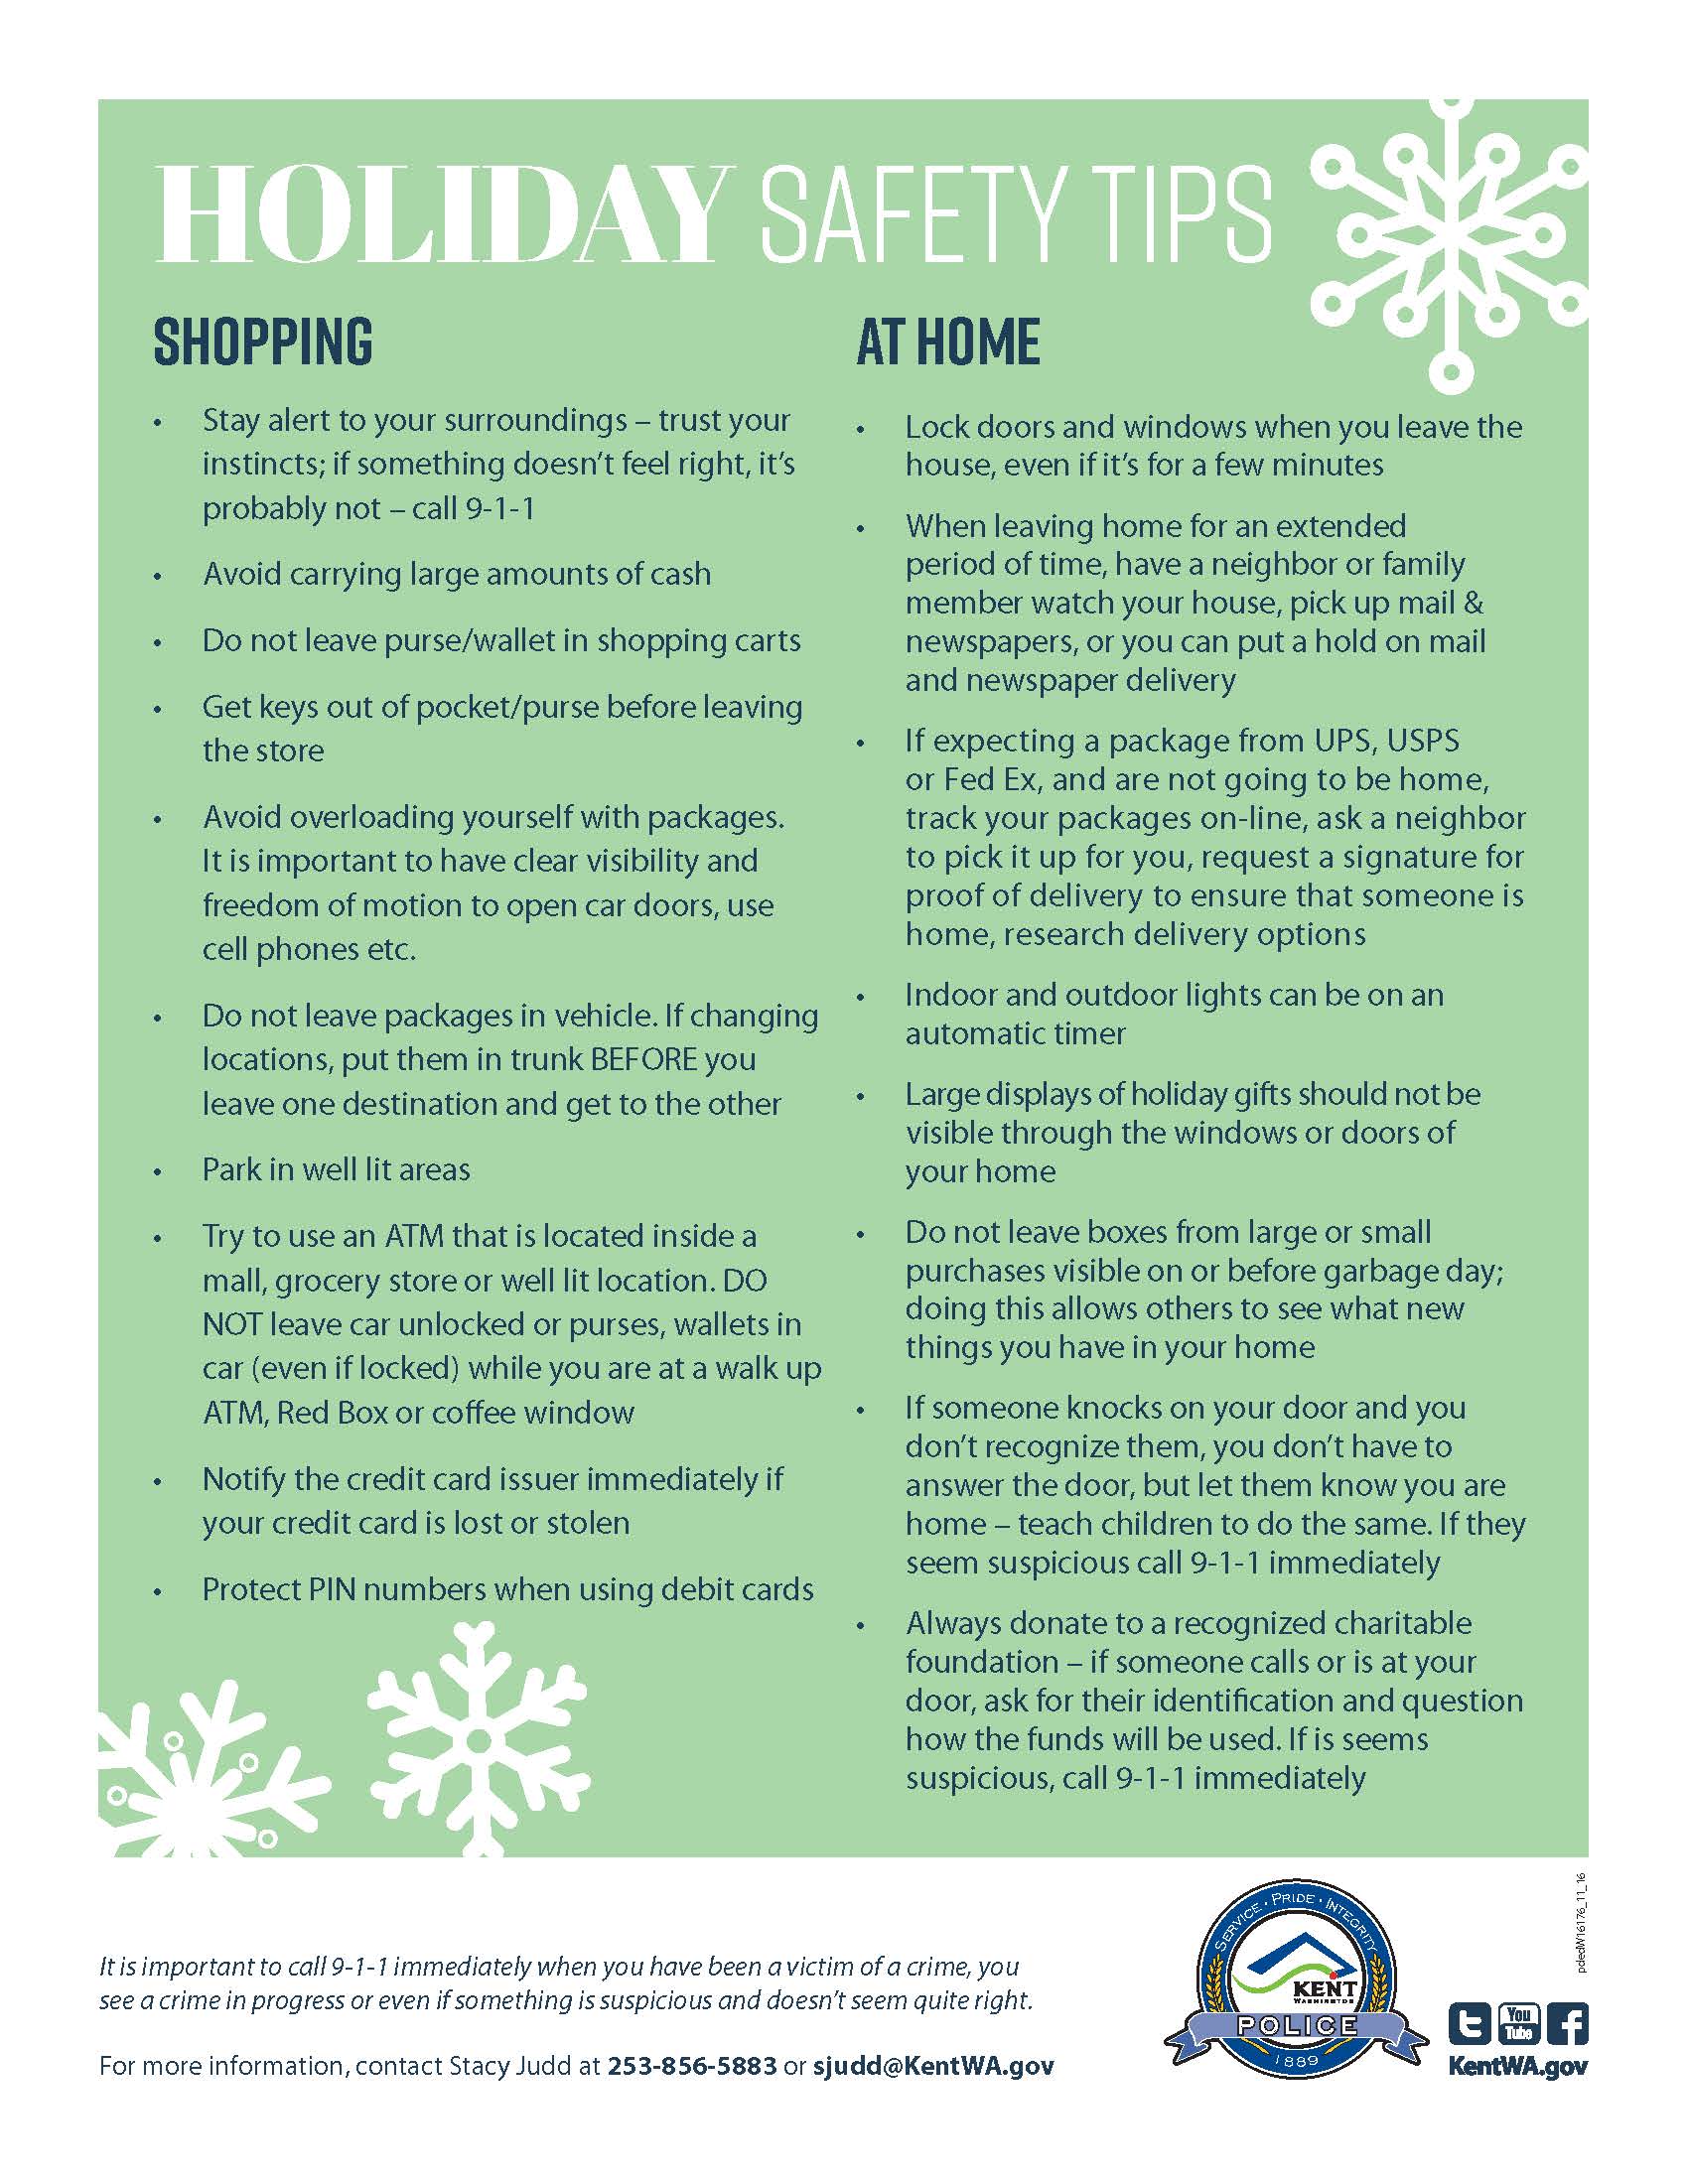 Stay Safe this Holiday Season with Safety Tips from the City of Kent, Washington